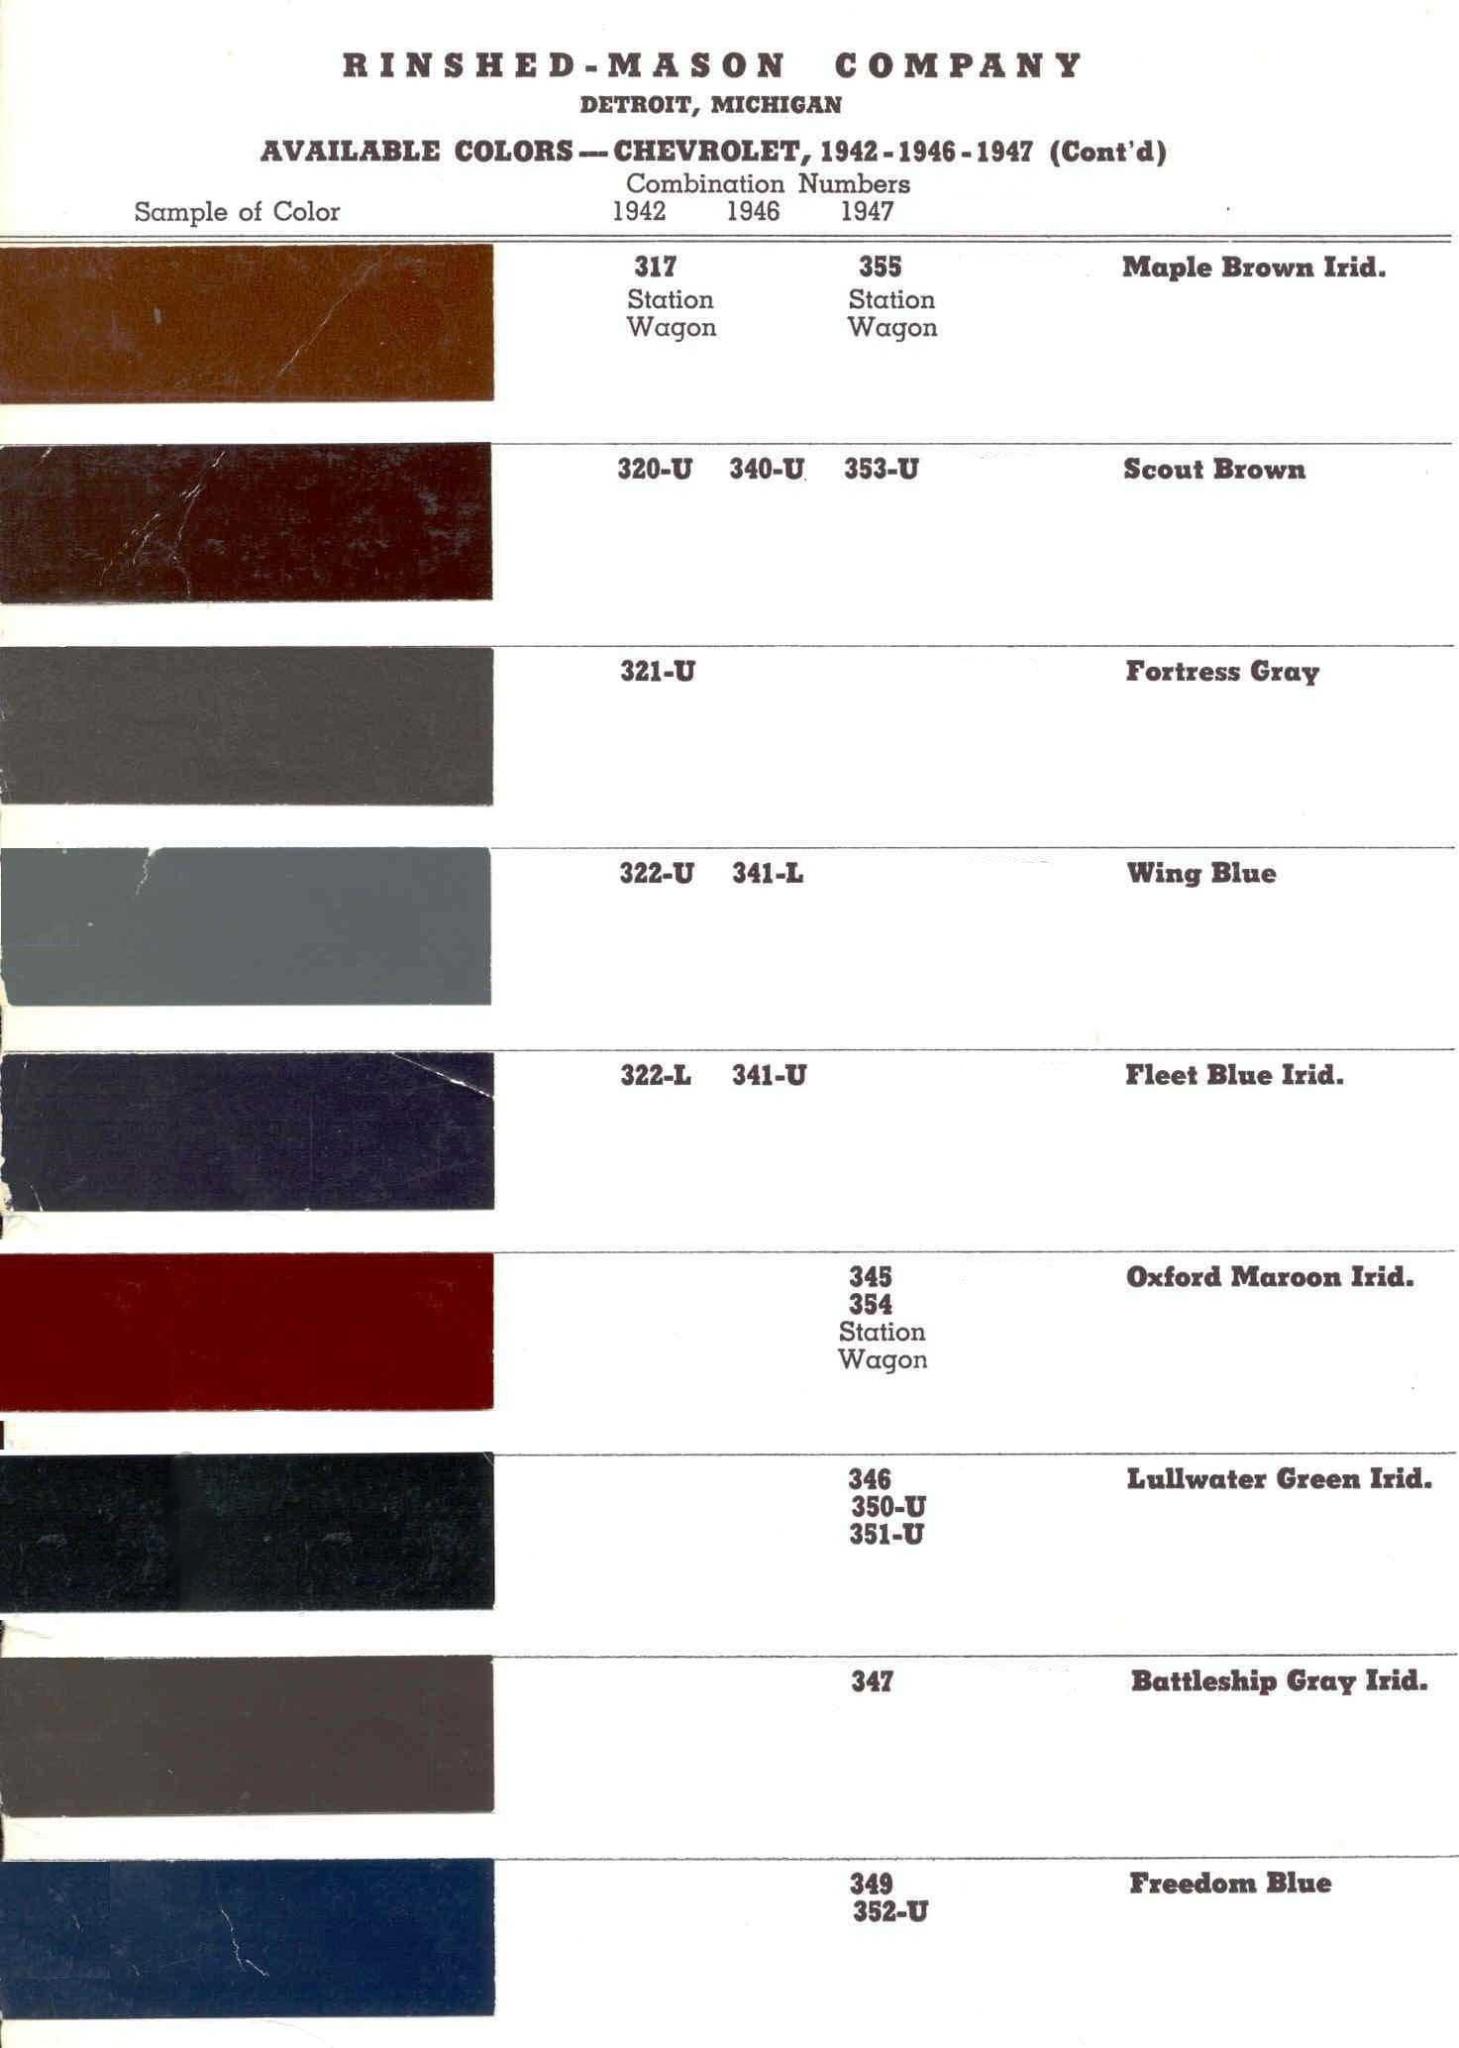 Color Examples and their codes for Chevrolet Vehicles